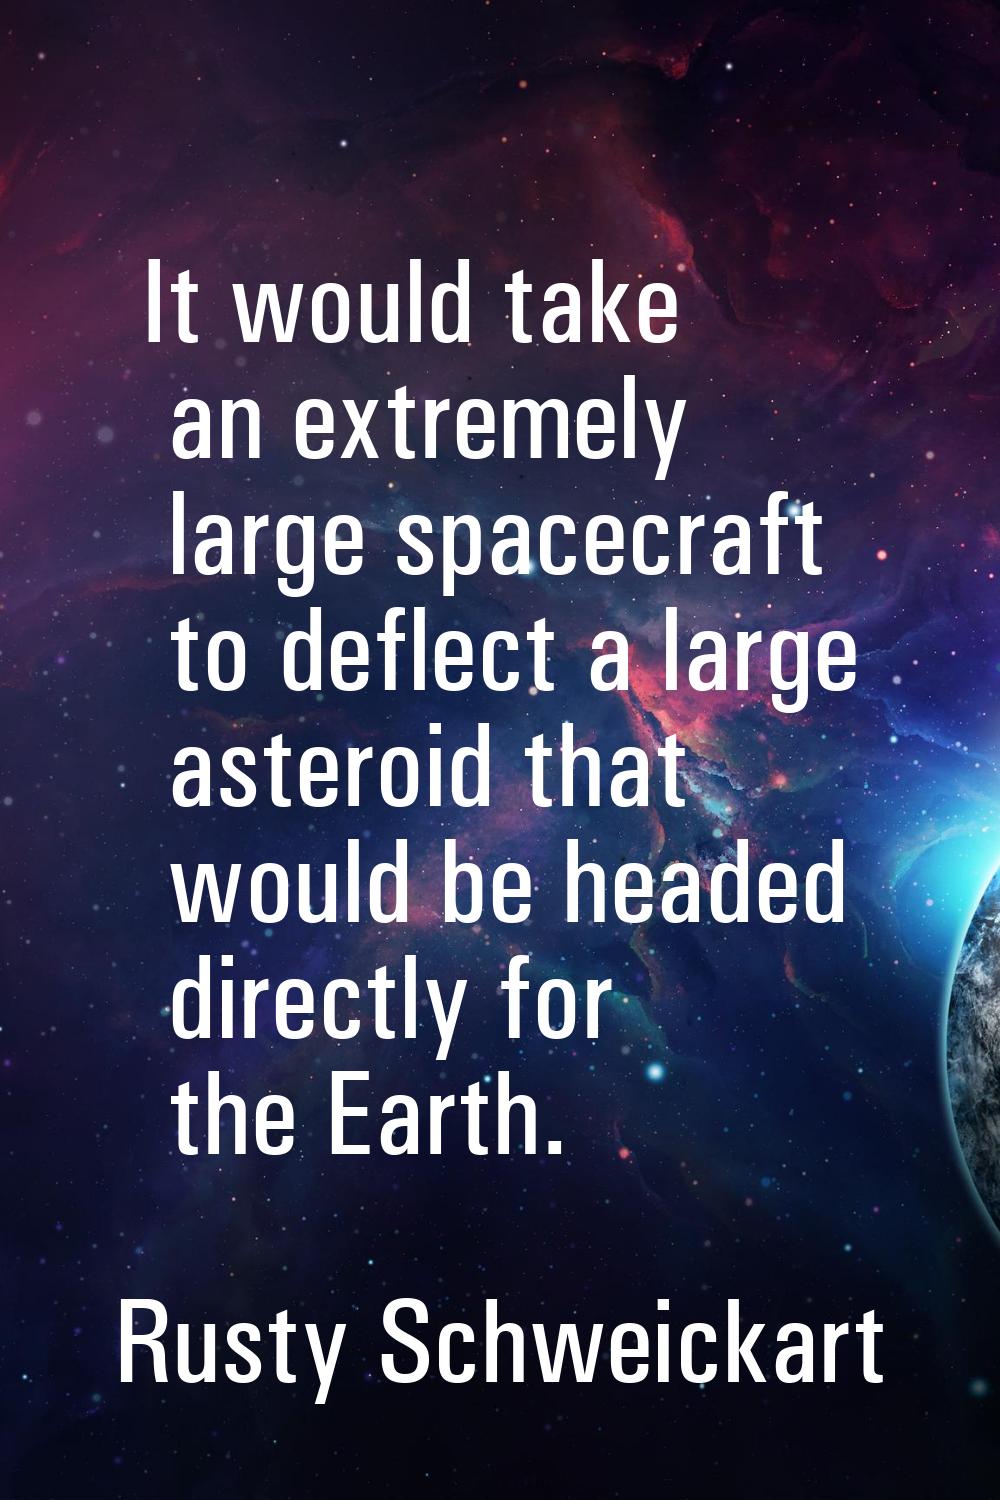 It would take an extremely large spacecraft to deflect a large asteroid that would be headed direct